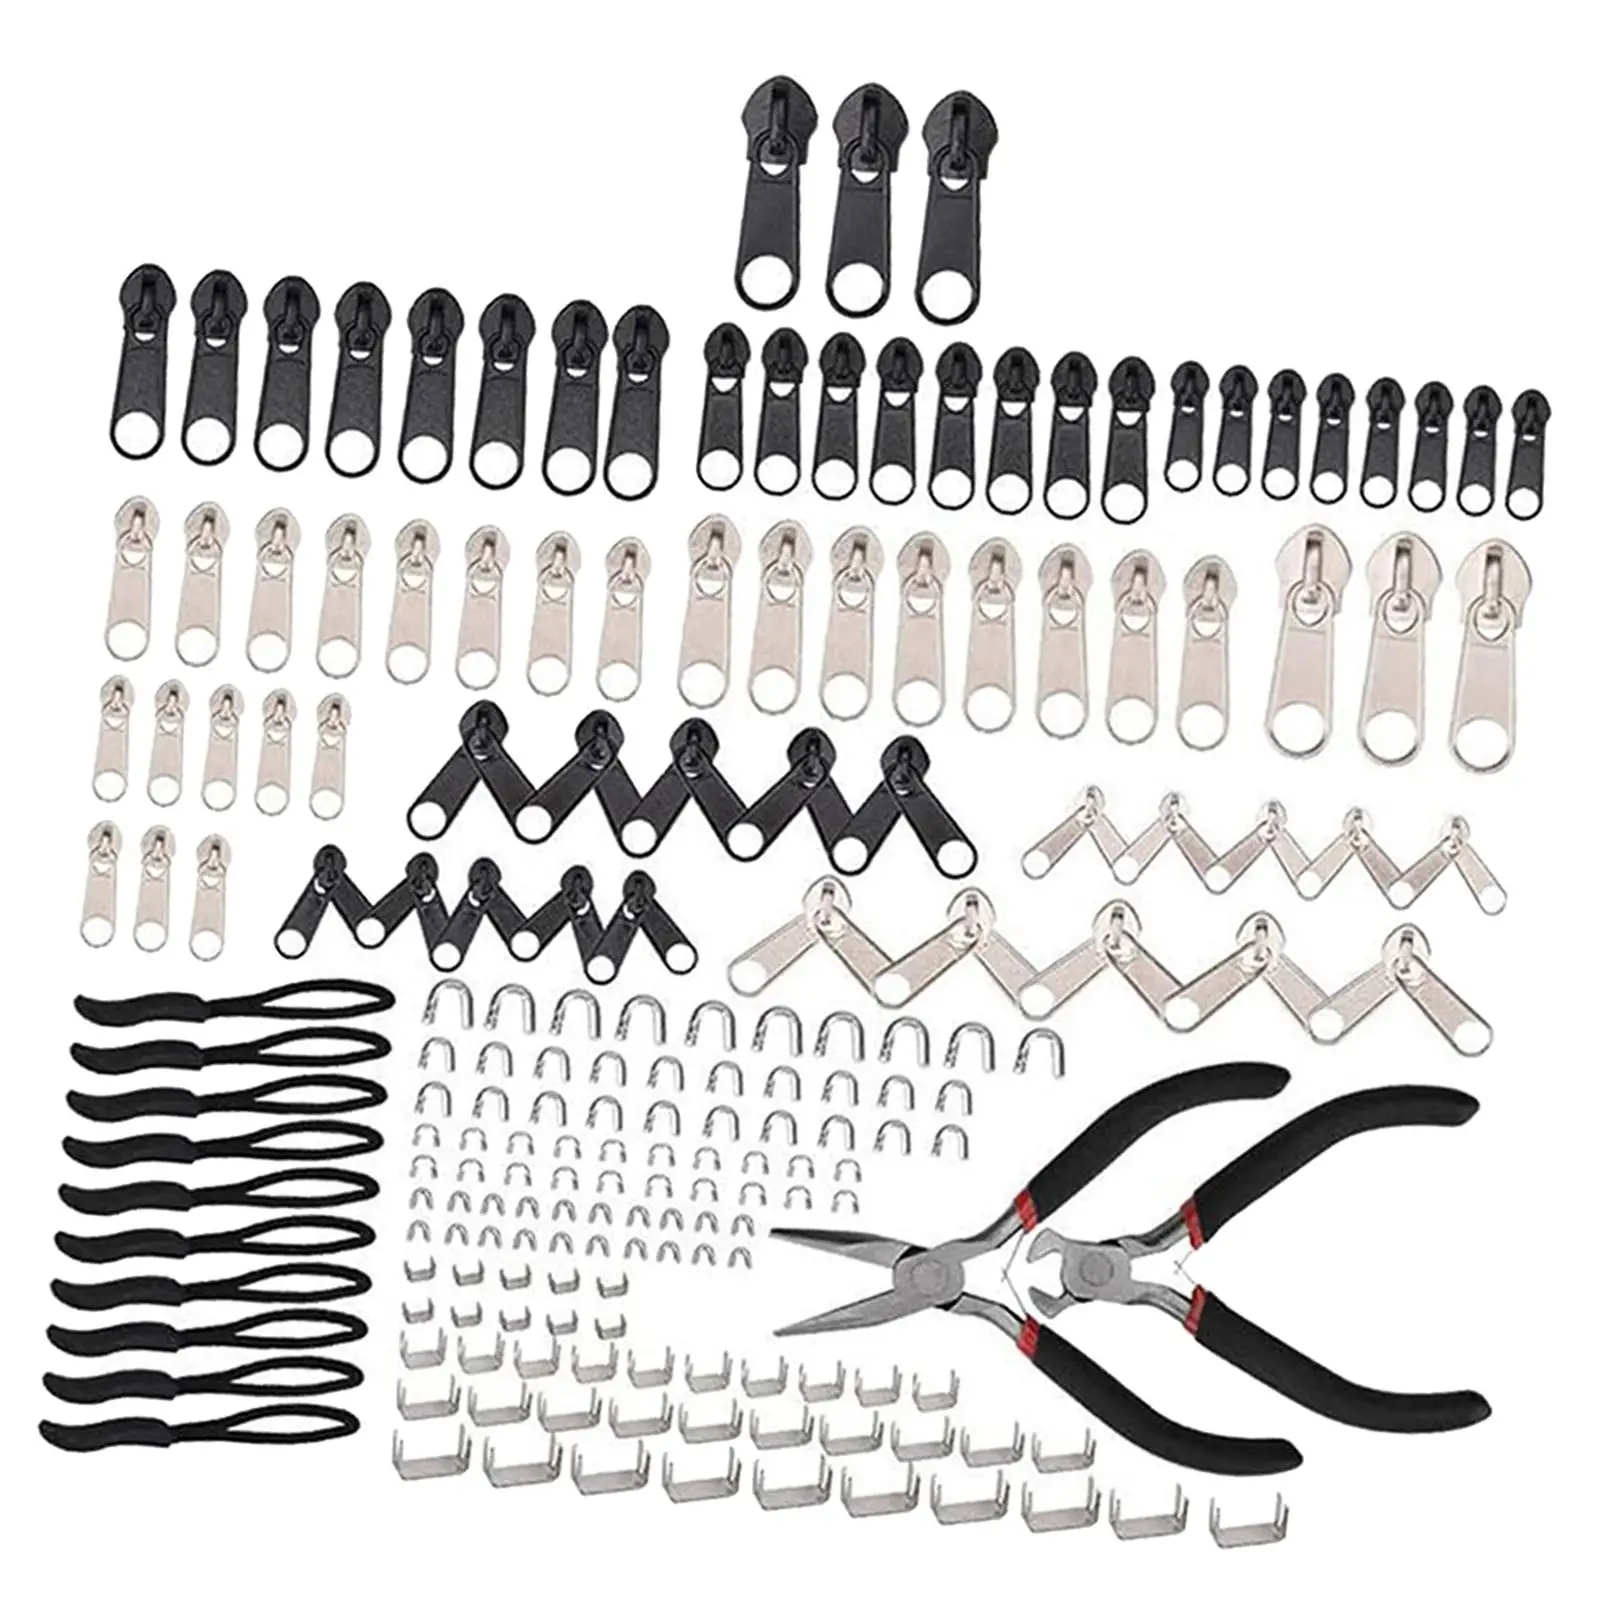 197x Fix Zippers Repair Kits with Install Pliers Zipper Replacement Instant Zipper for Backpack Clothes Tents Handbags Jackets